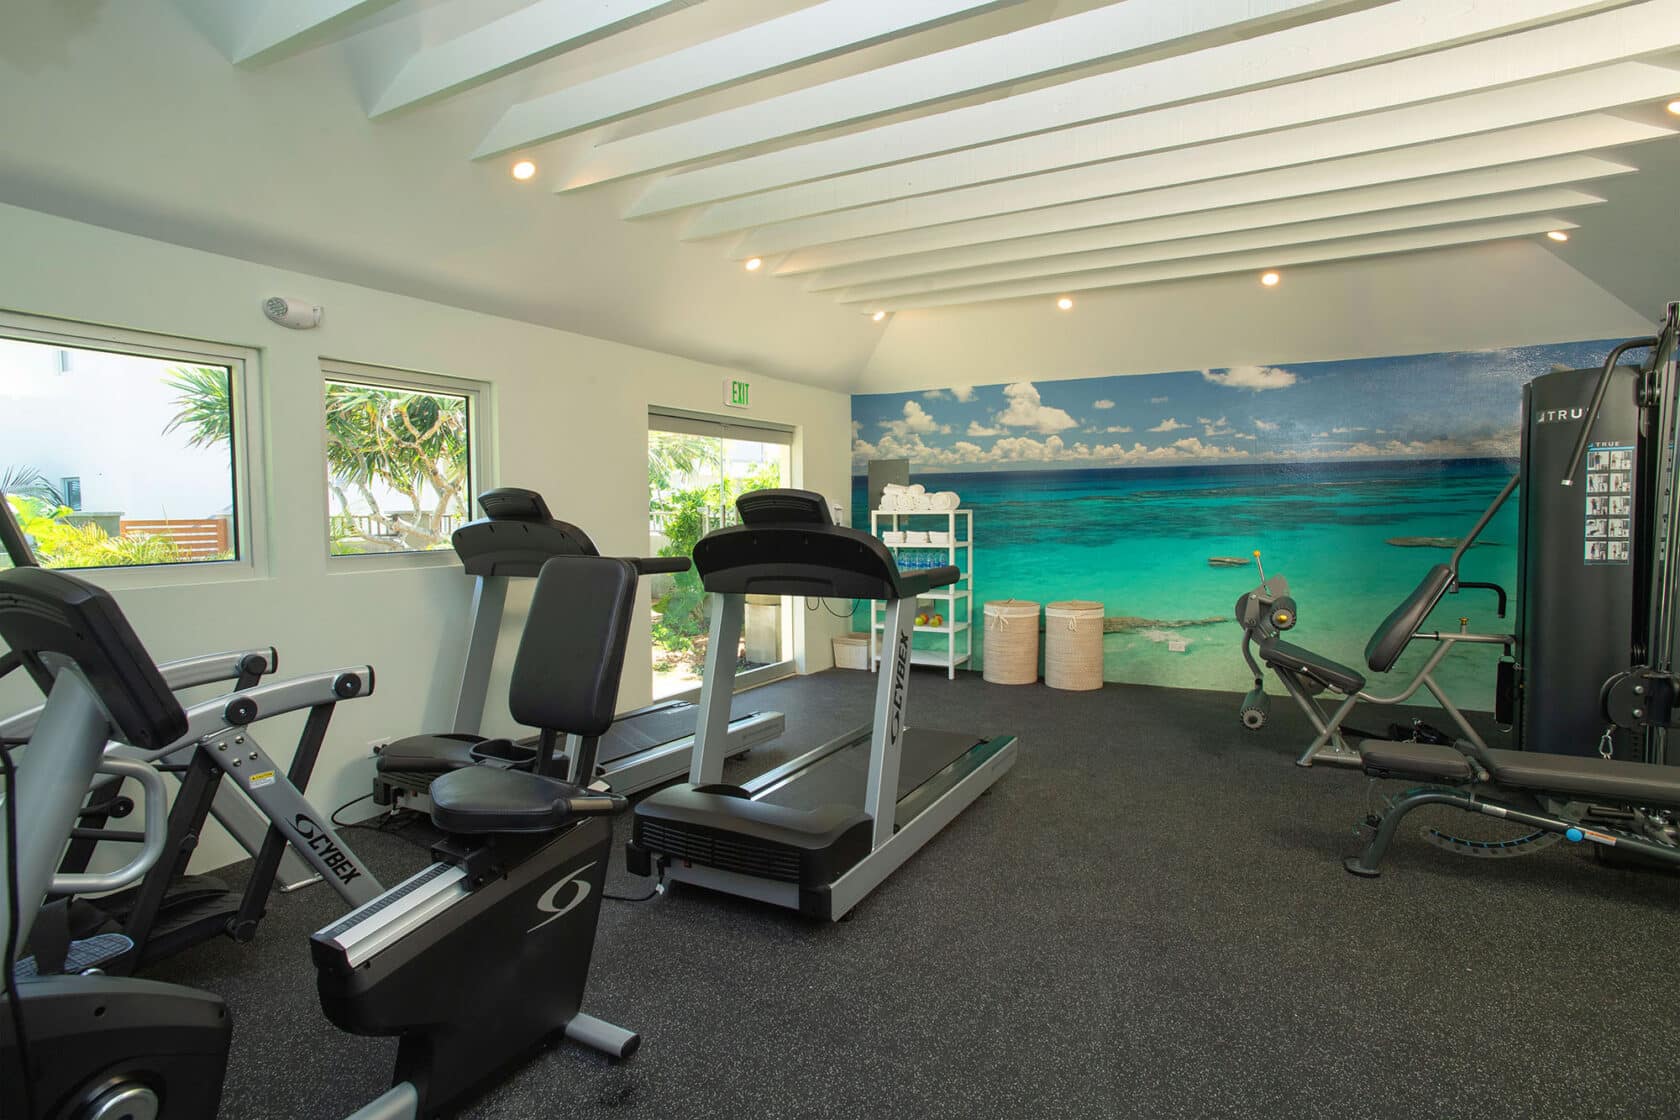 A gym room with a stunning view of the ocean at Bermuda vacation rentals.